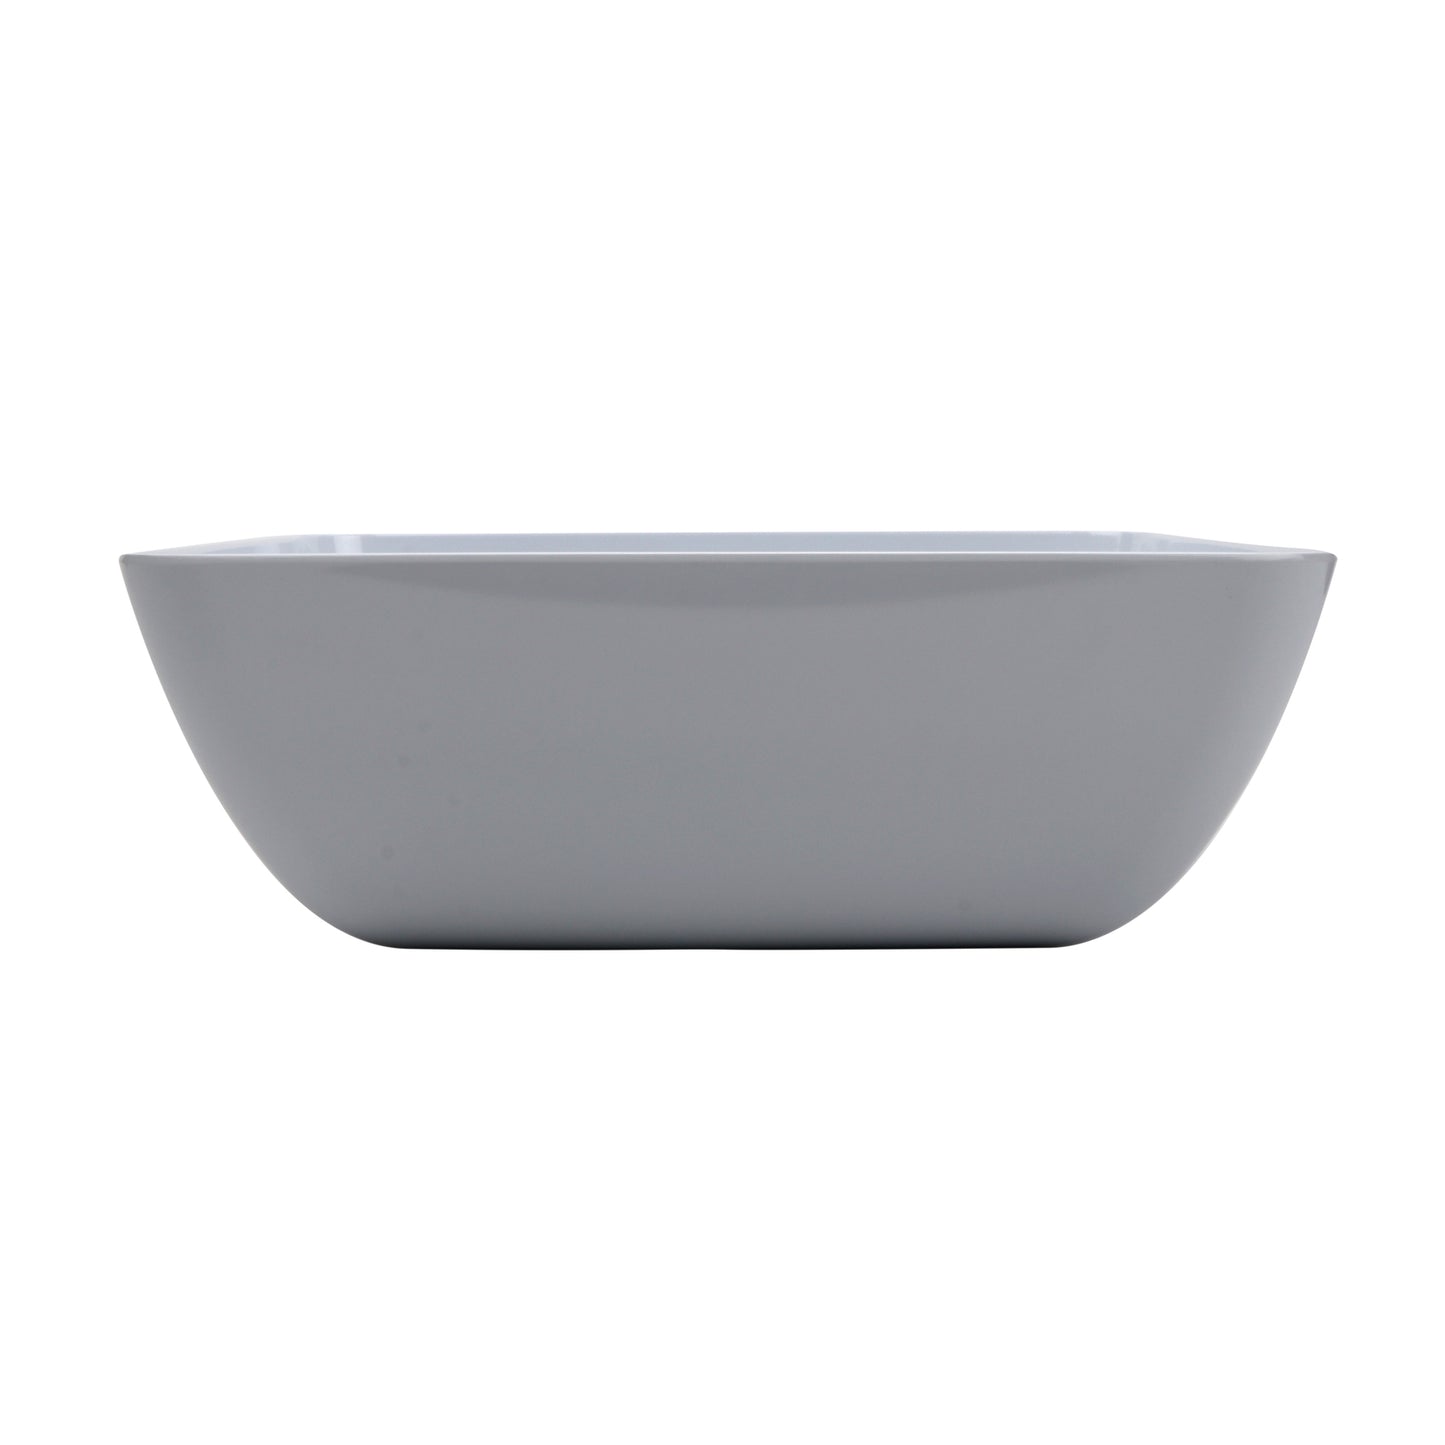 14 qt. Melamine, White, Square Large Display Bowl with Rounded Corners, (14.1 qt. rim-full), 4.75" Deep, G.E.T. Midtown